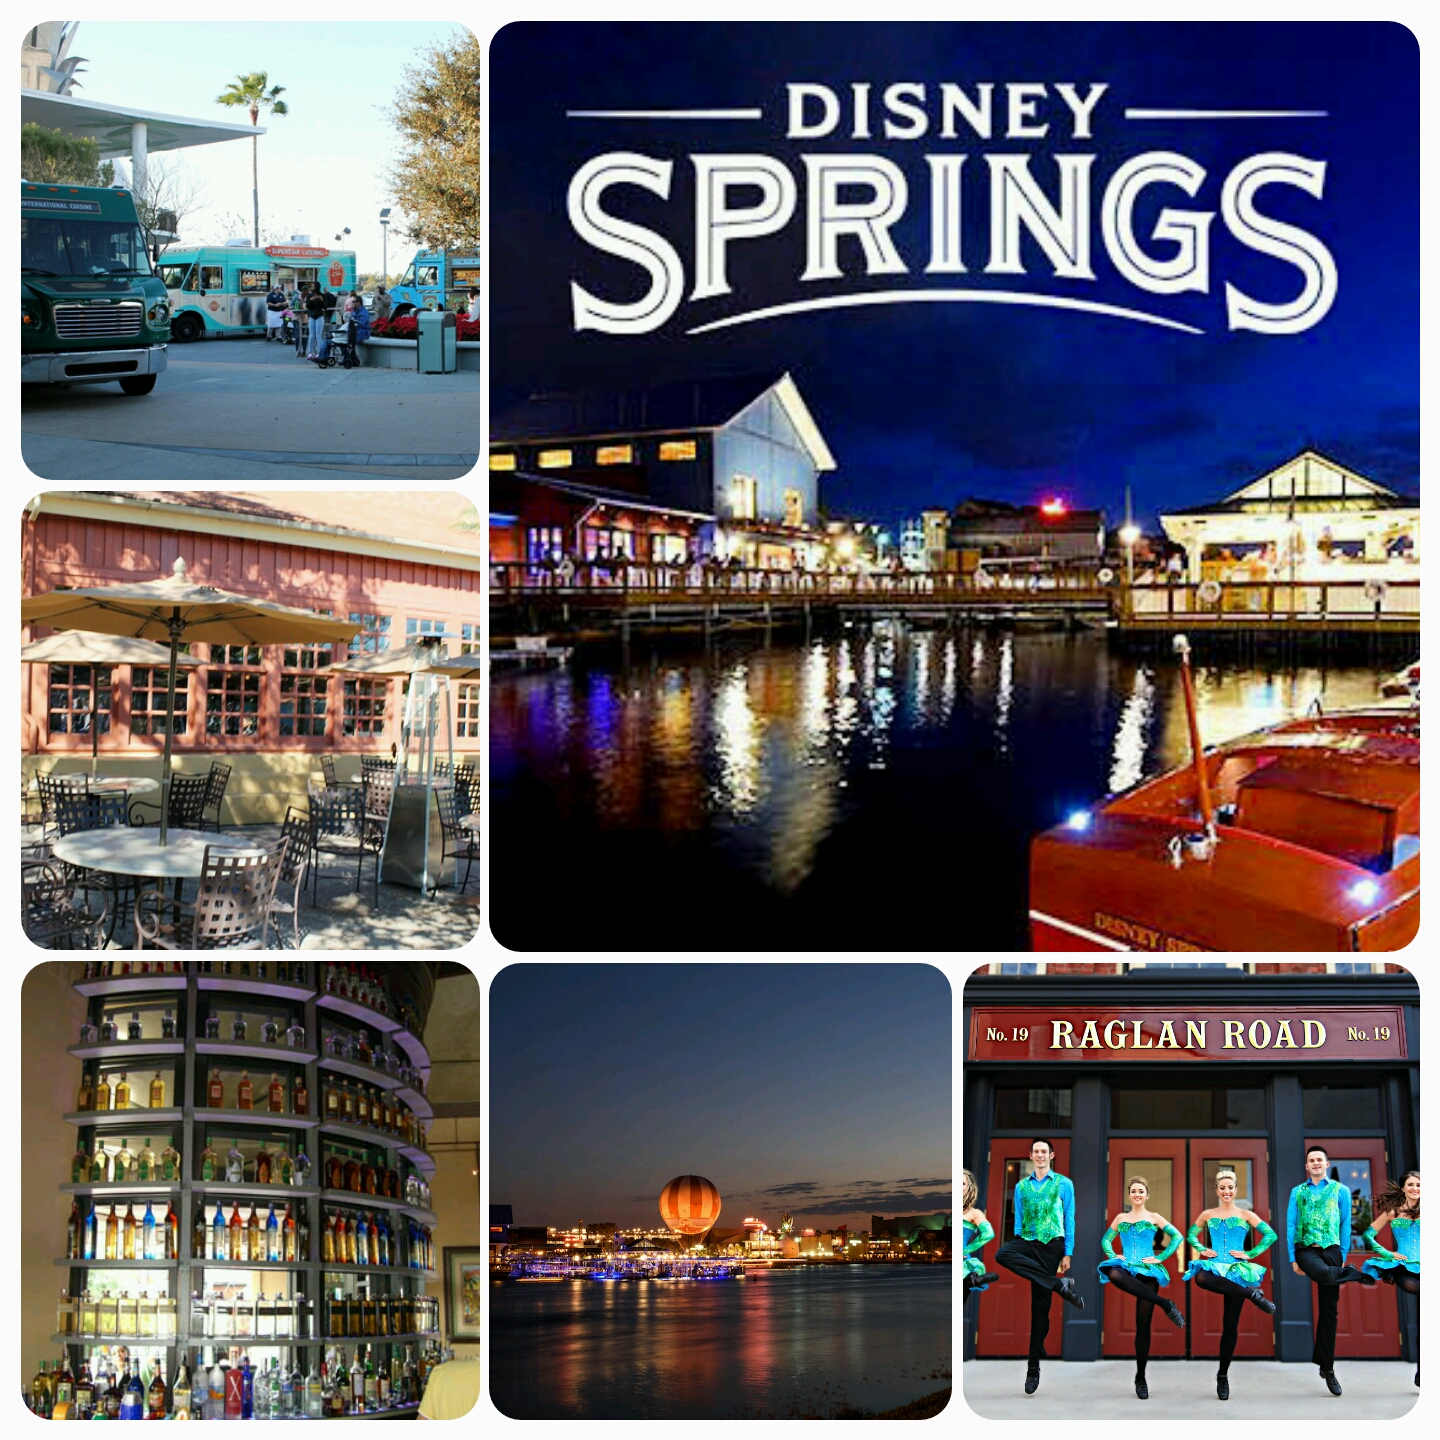 Take Your Love on a “Disney Date Night” To Disney Springs!